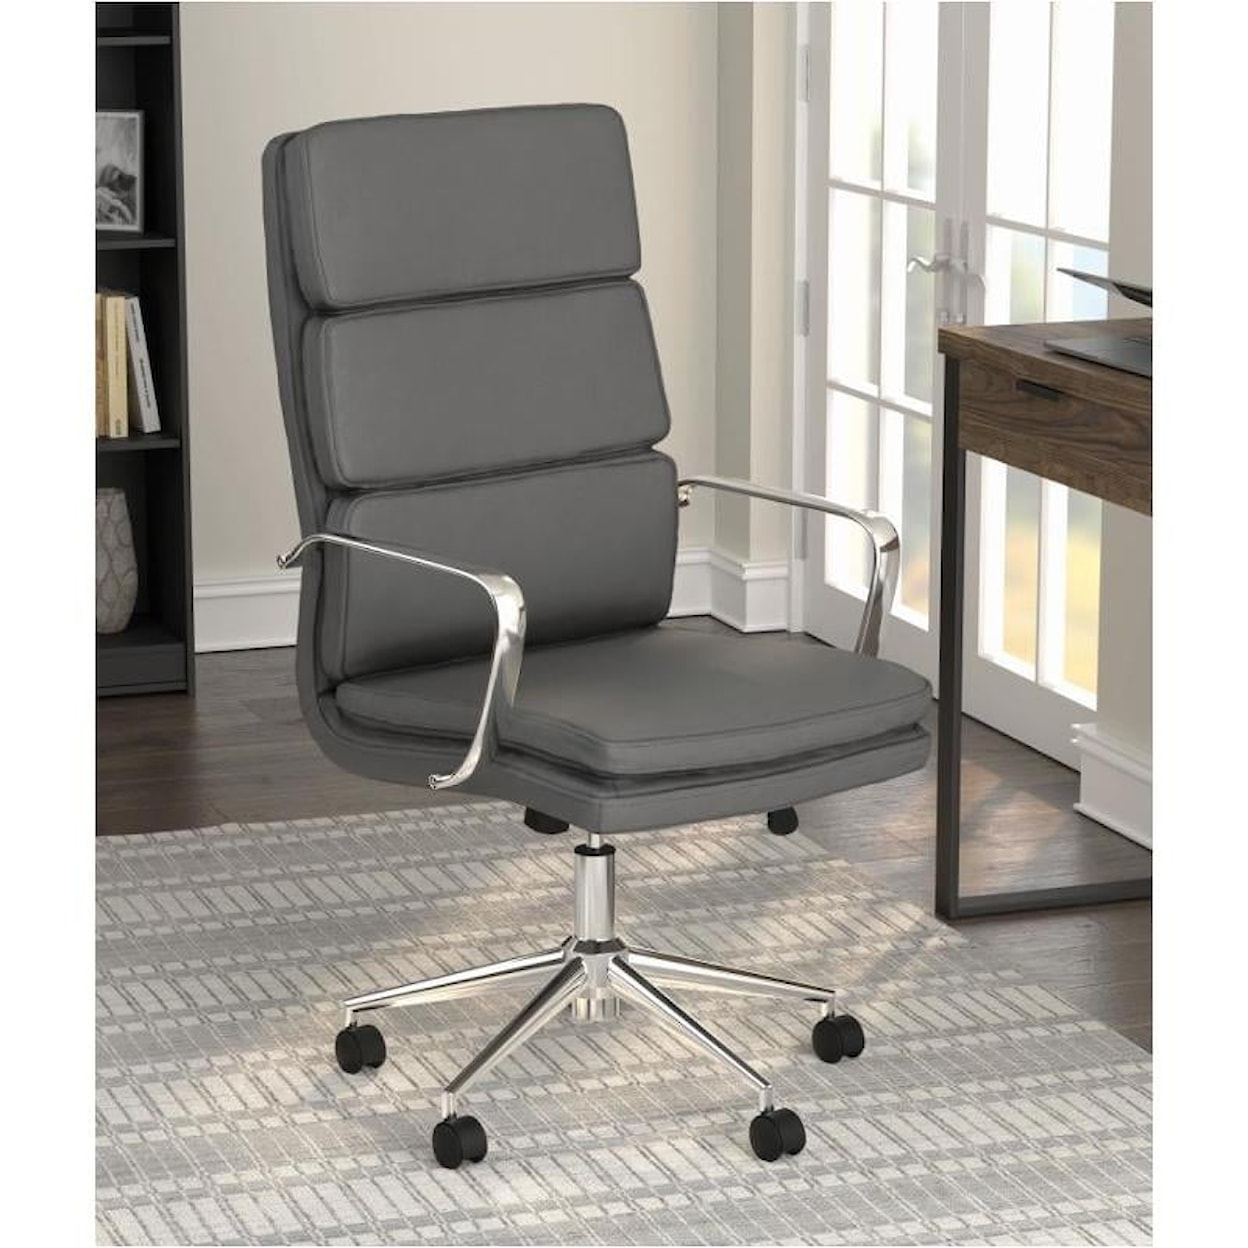 Coaster Francis Office Chair FRANCIS GREY OFFICE CHAIR |